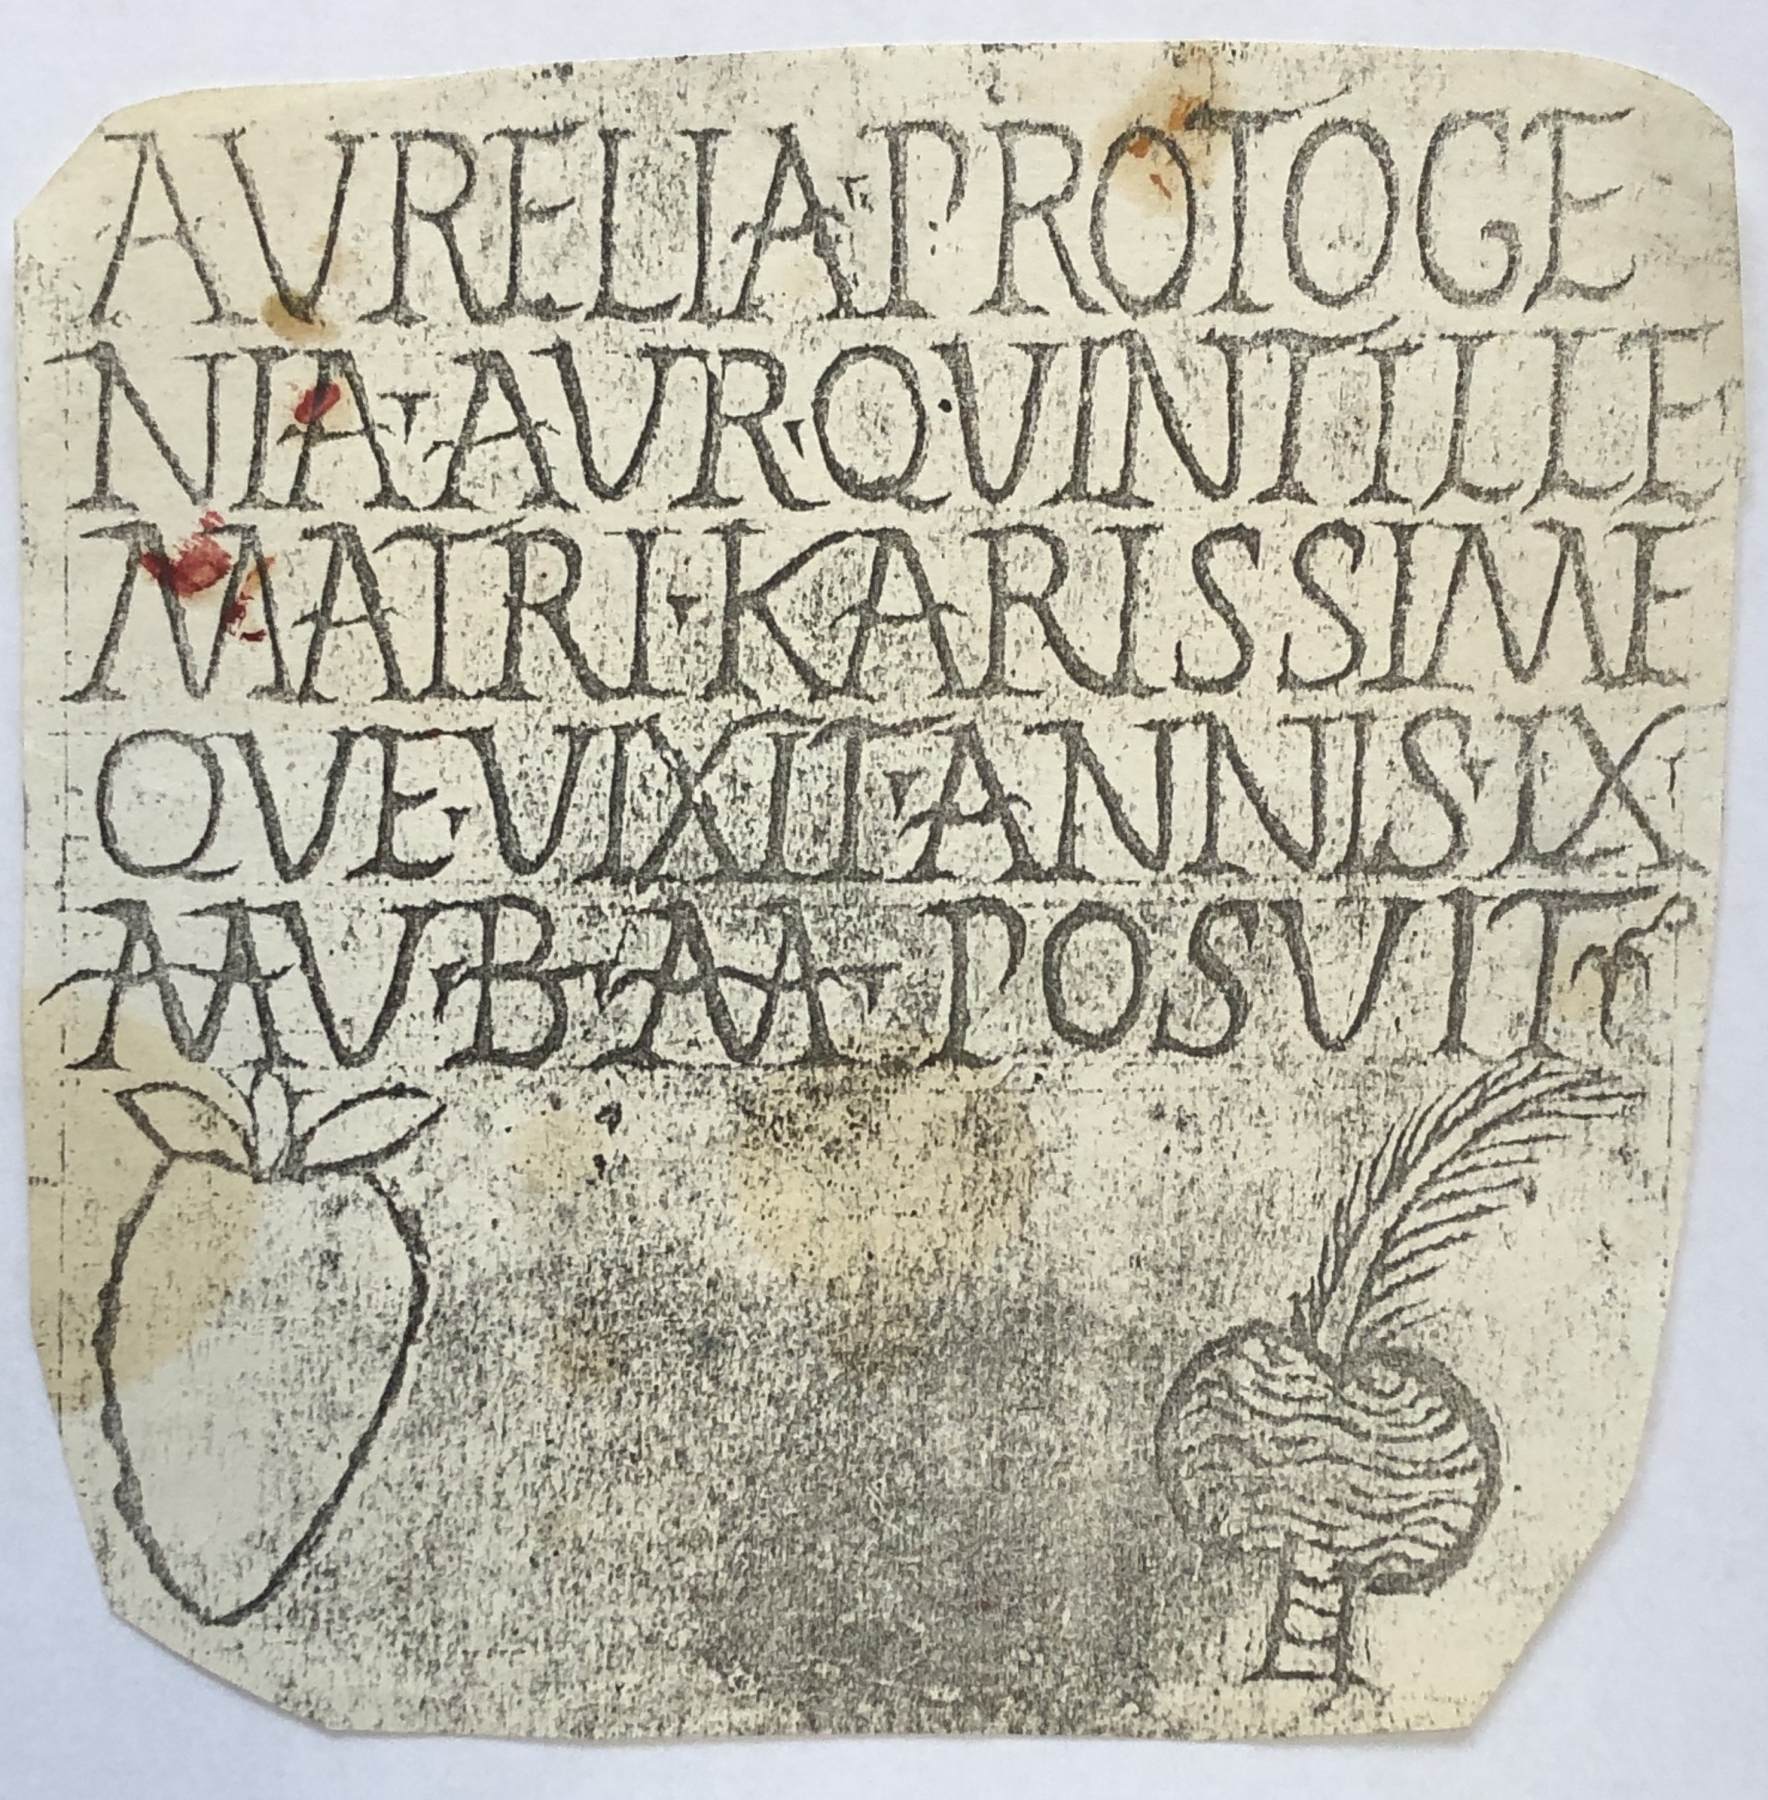 Black-and-white xerox of a marble Burial Plaque&amp;nbsp;(c. 3rd-4th century, Rome) from the artist&amp;#39;s archive / Collection Nancy Graves Foundation, Inc., New York.

The plaque is in the collection of the Jewish Museum, New York, where Graves must have first seen it.

&amp;nbsp;